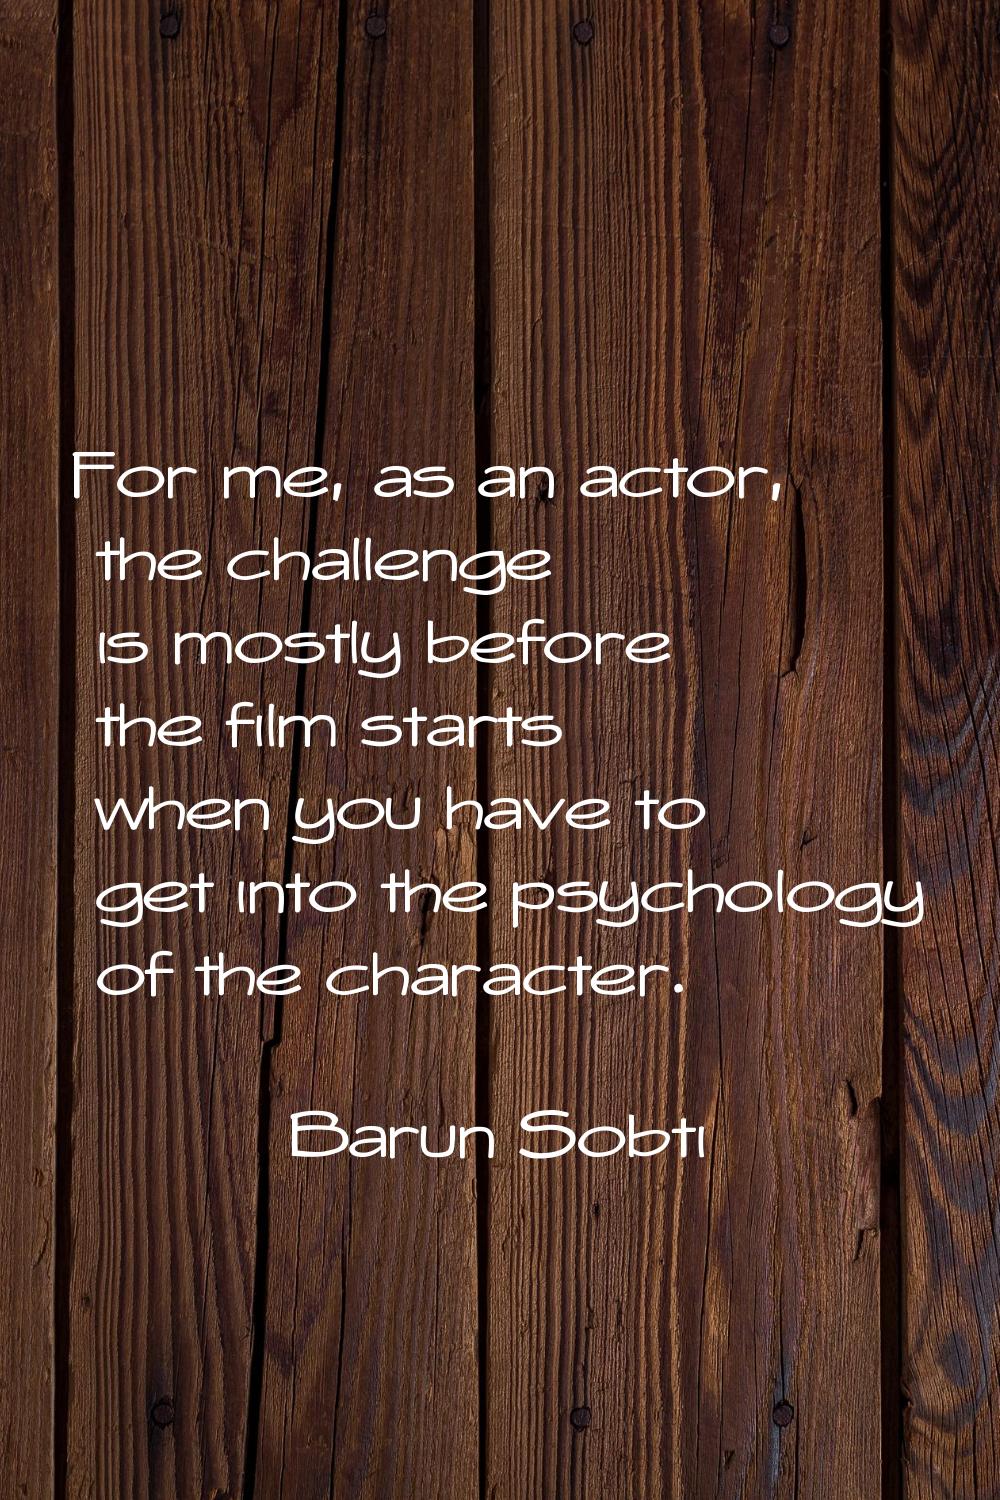 For me, as an actor, the challenge is mostly before the film starts when you have to get into the p